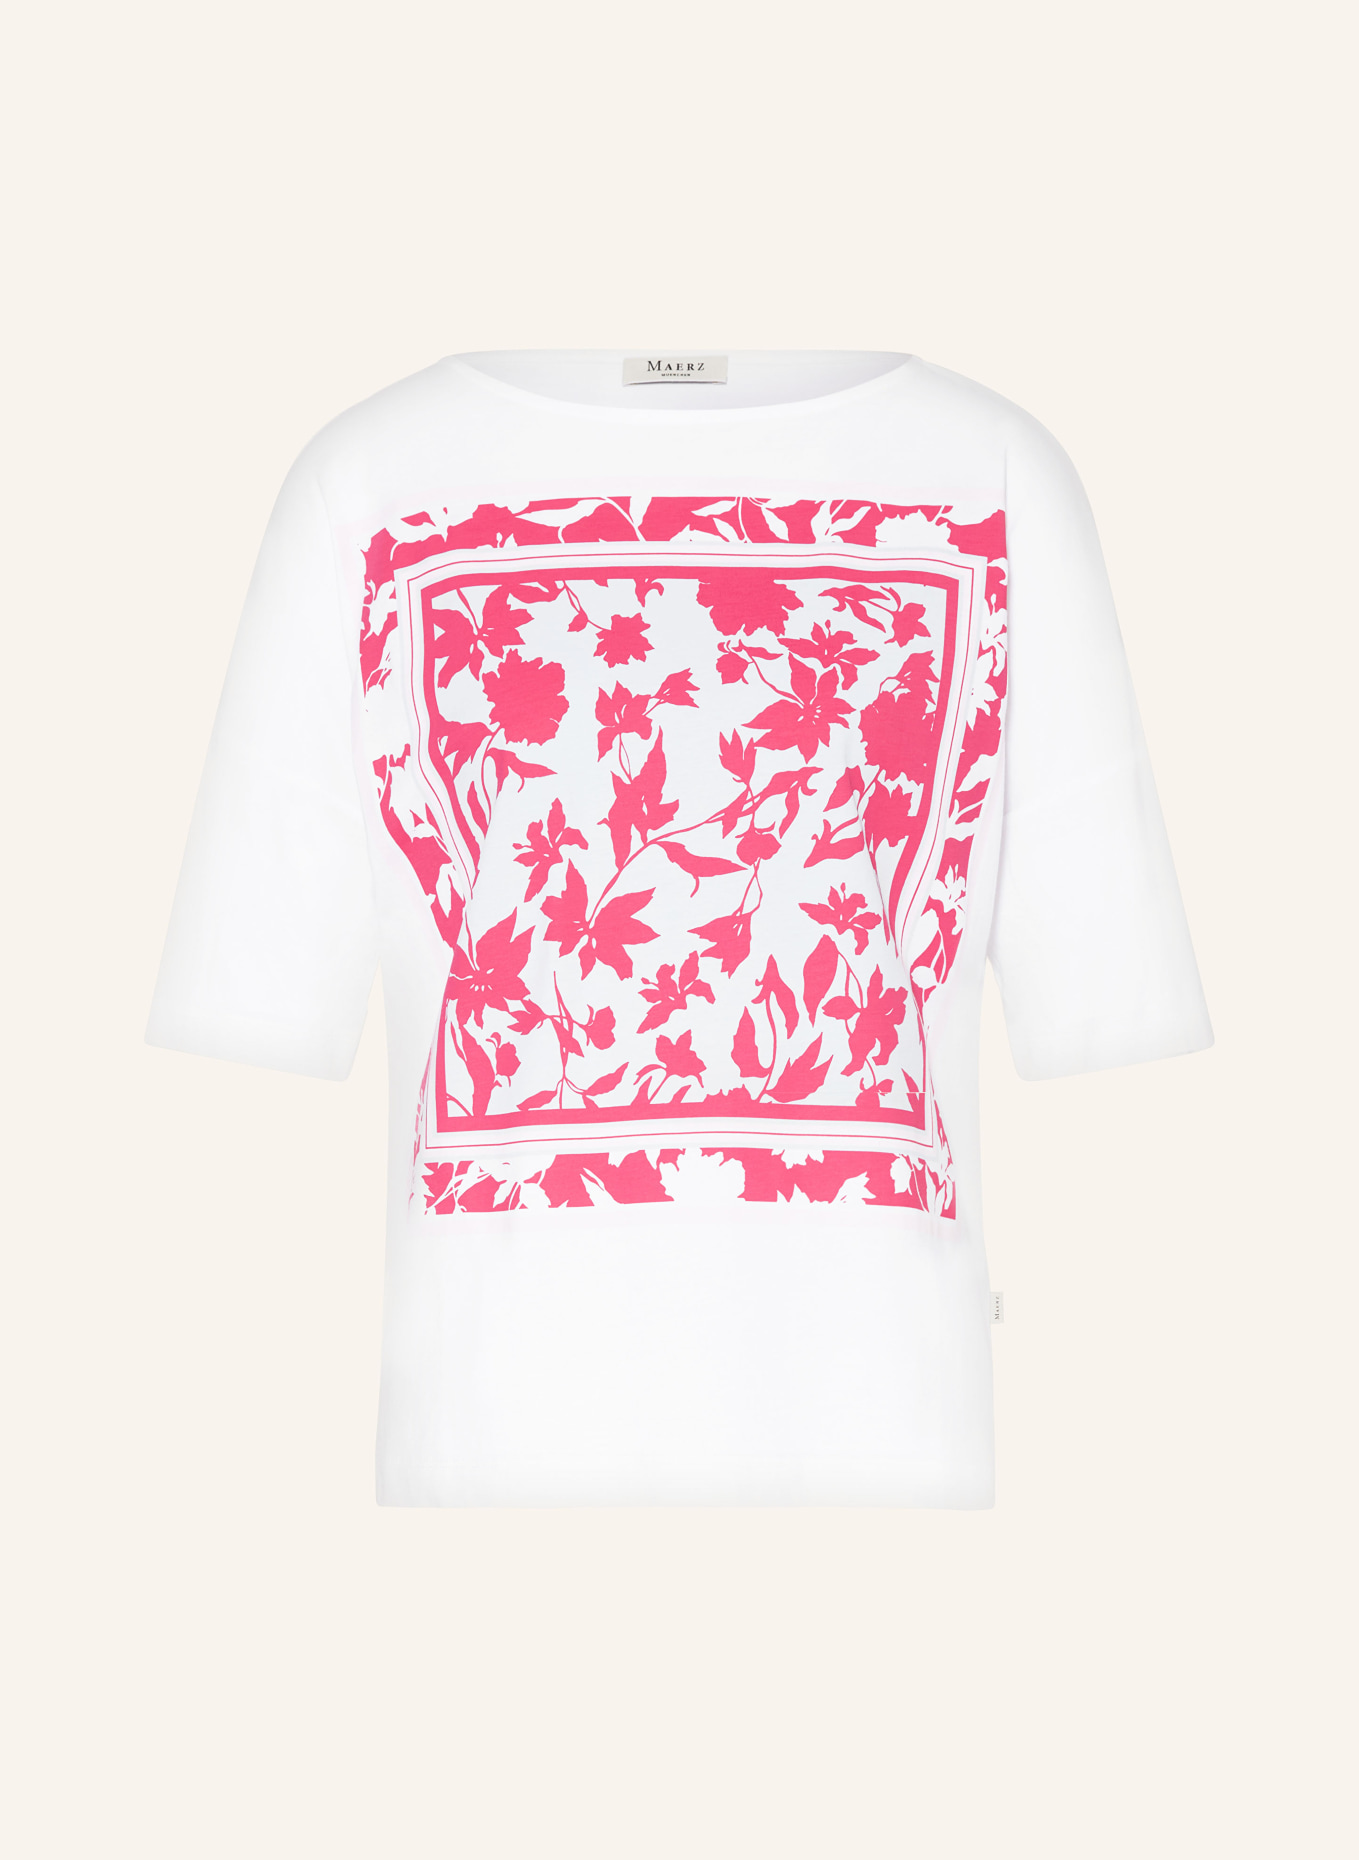 MAERZ MUENCHEN T-shirt, Color: WHITE/ PINK/ LIGHT BLUE (Image 1)